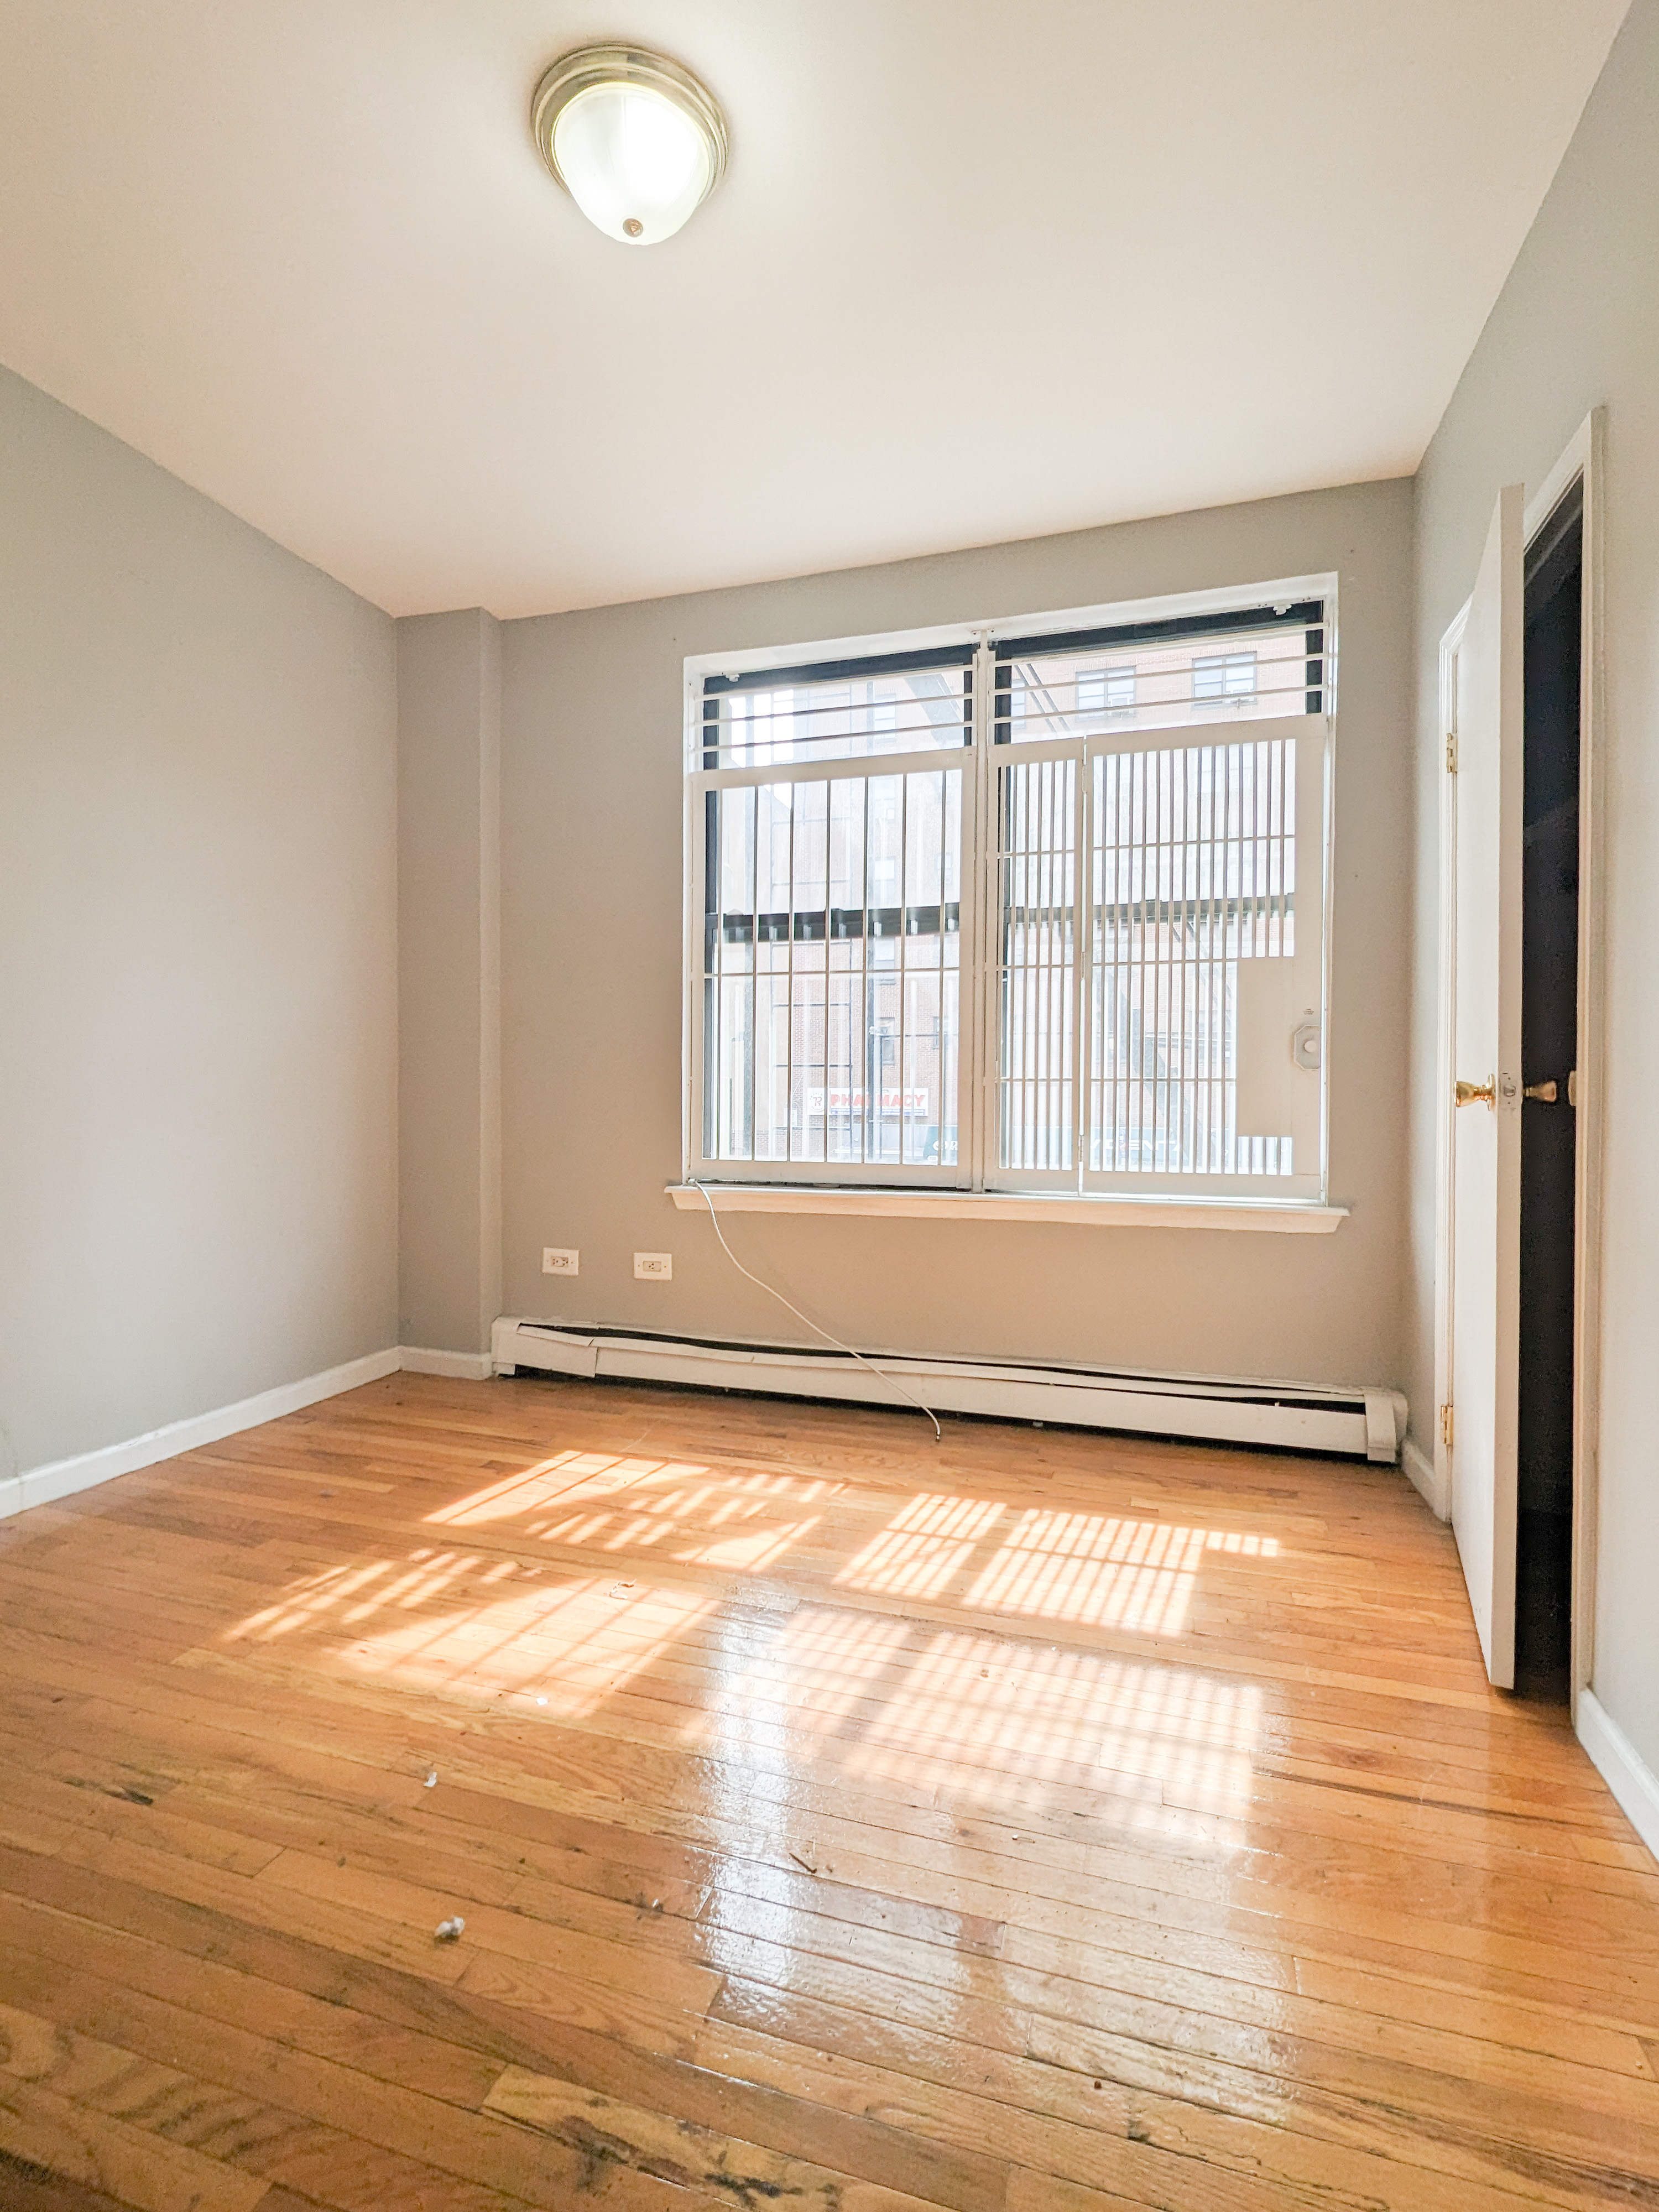 a view of an empty room with window and hardwood floor